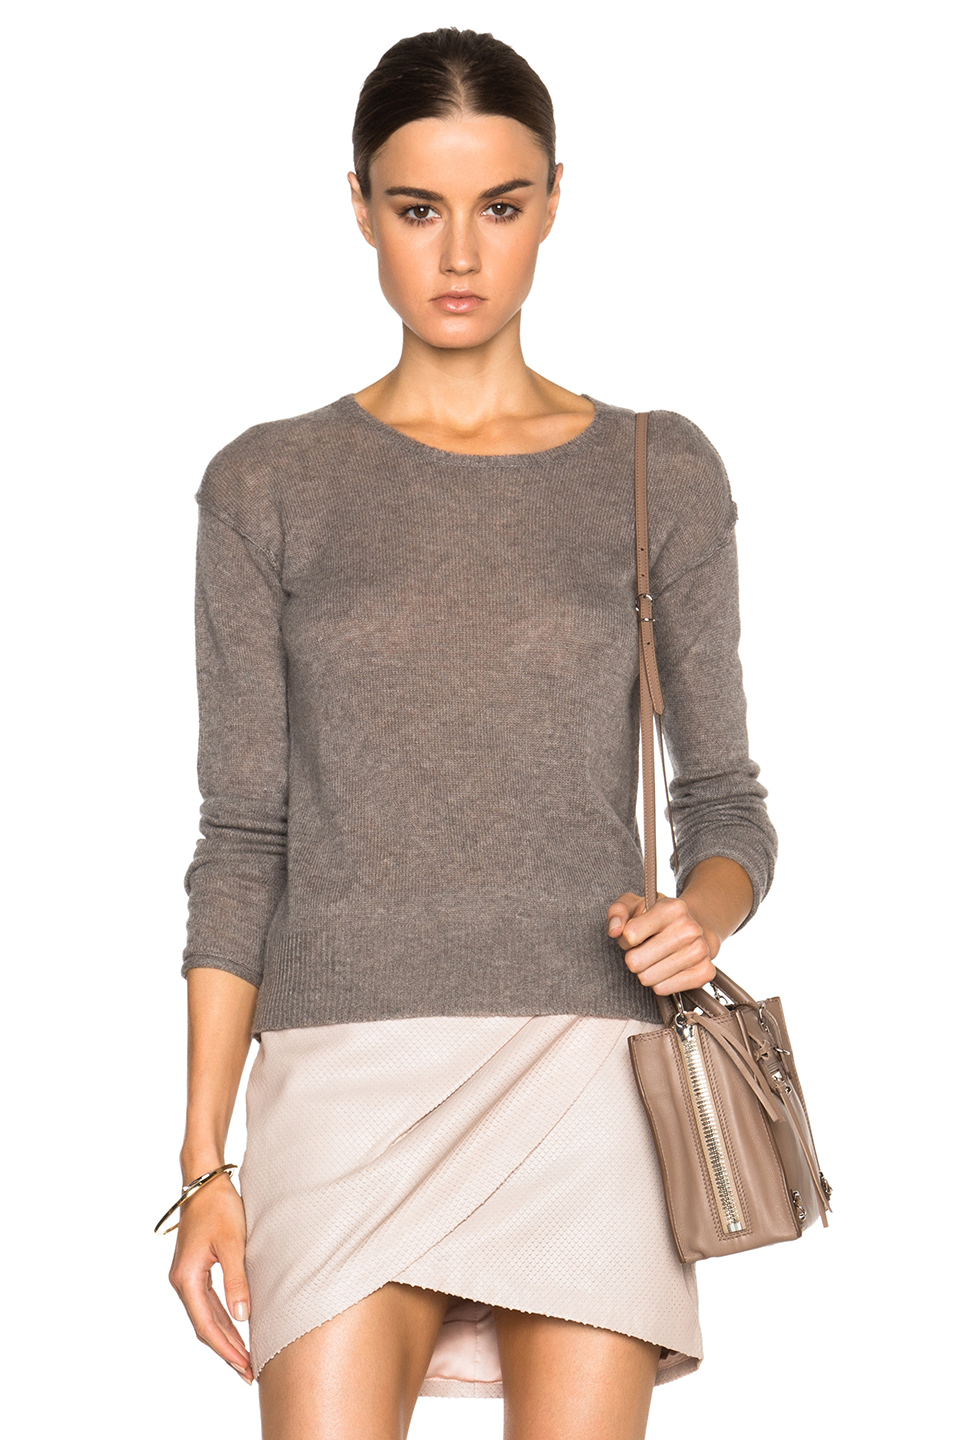 Lyst - James Perse Cashmere Crewneck Sweater in Brown